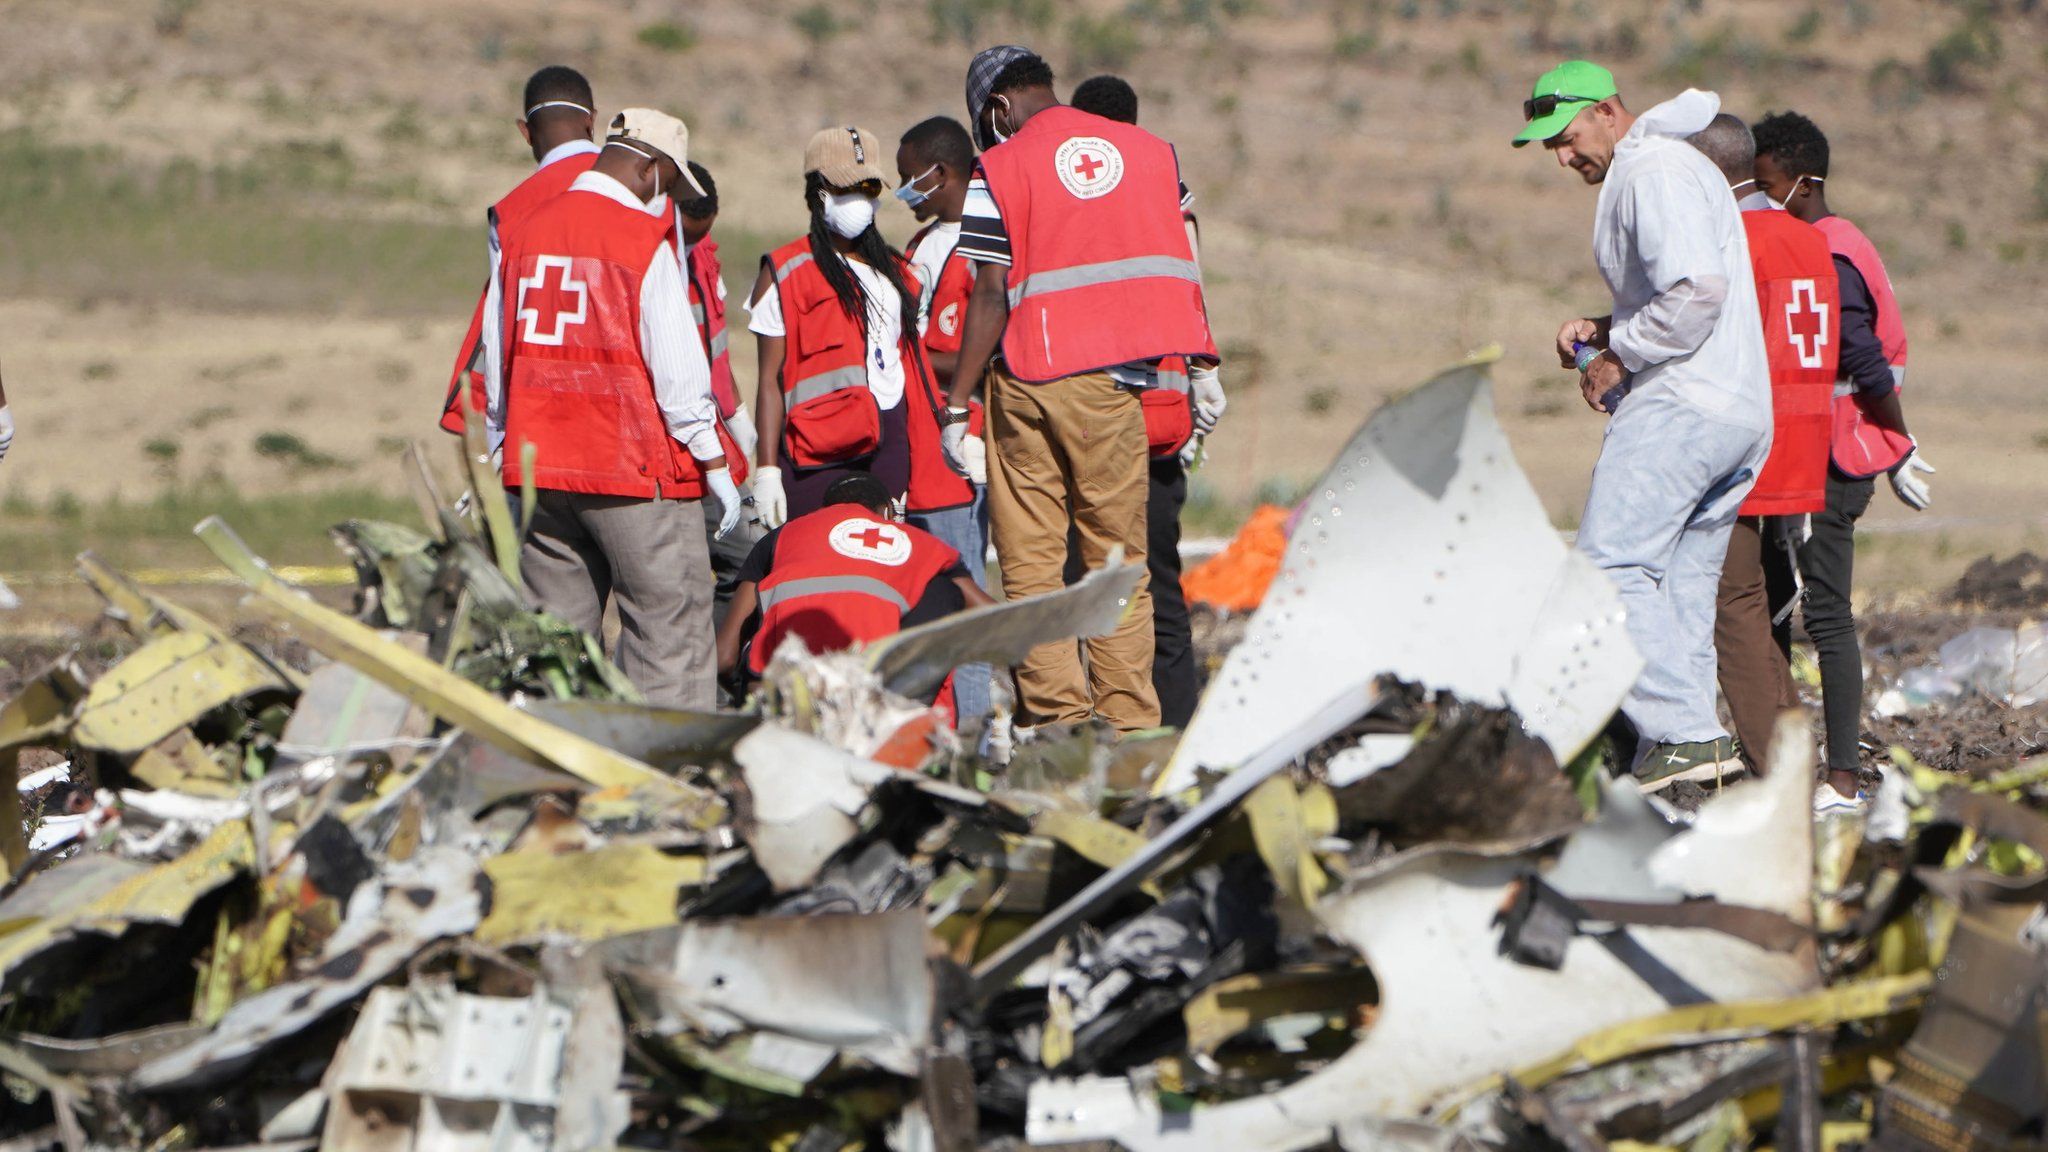 Forensics investigators and recovery teams collect personal effects and other materials from the crash site of Ethiopian Airlines jet